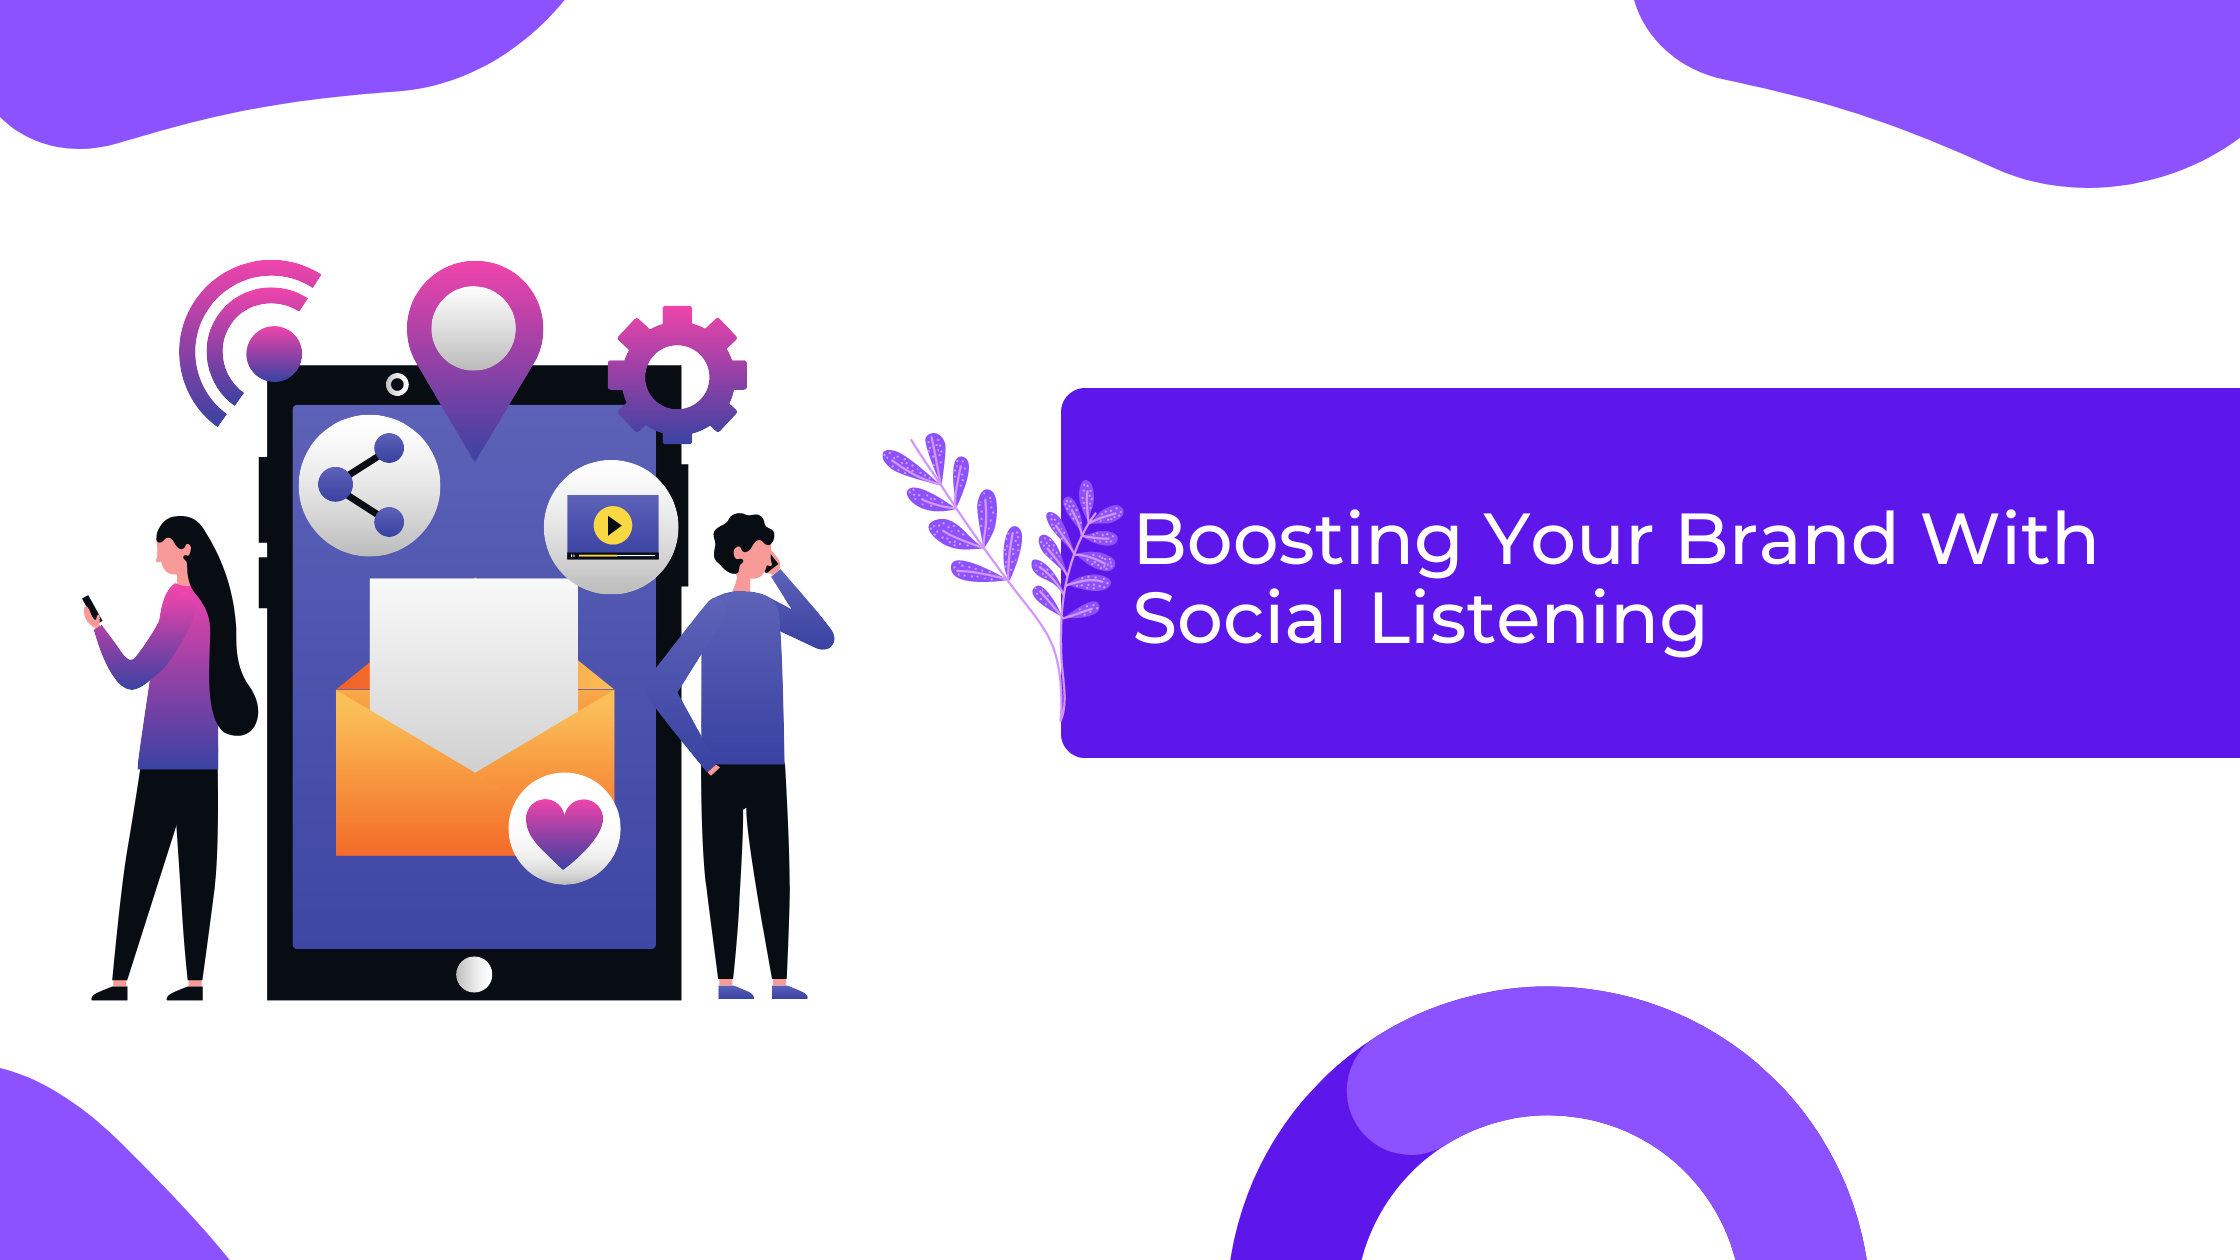 Boosting Your Brand With Social Listening